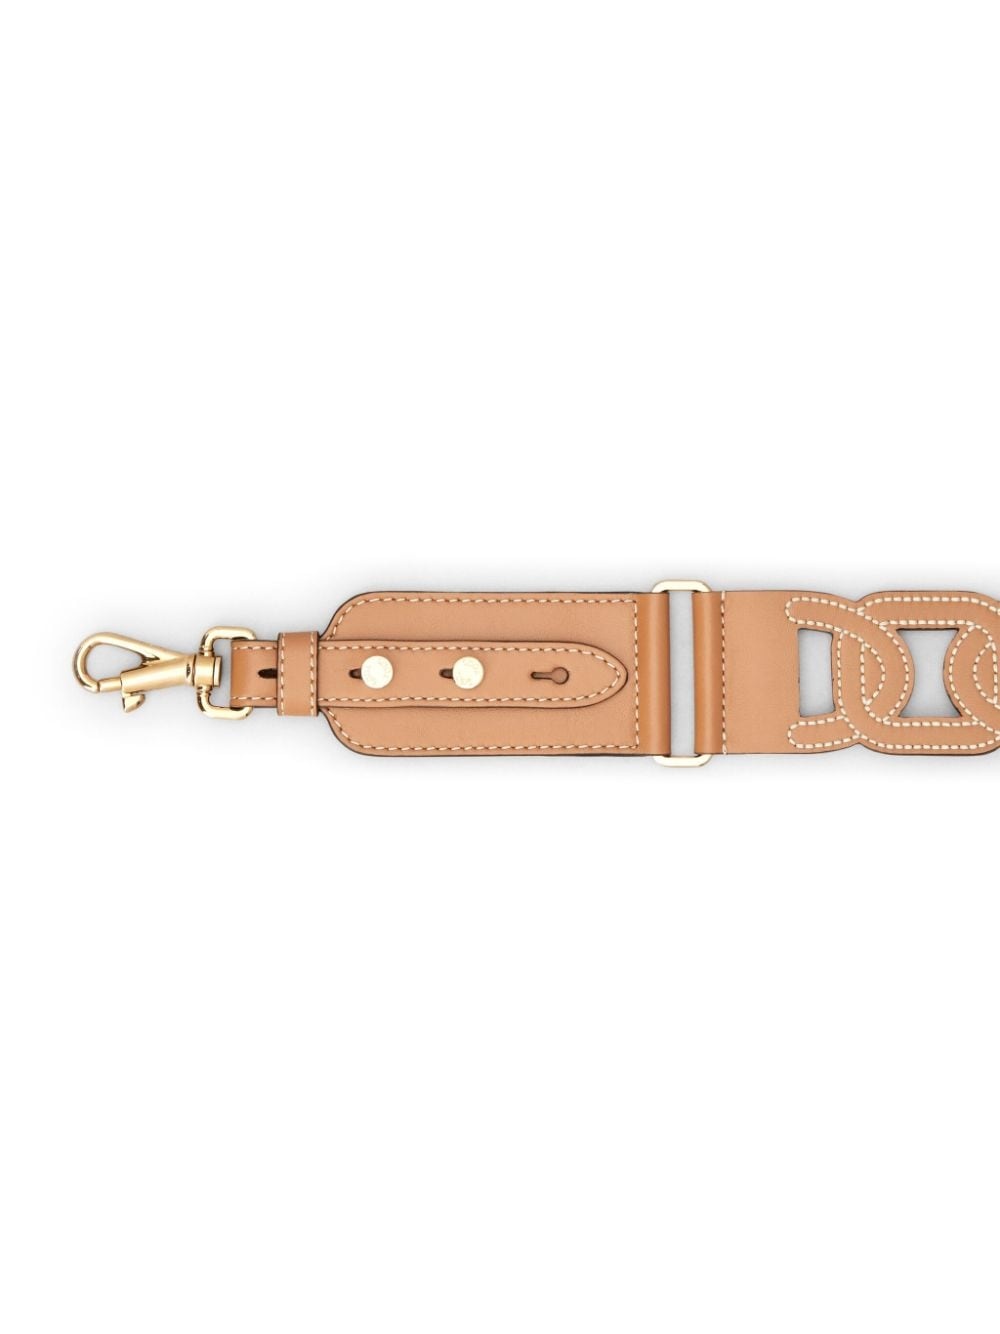 cut-out leather bag strap - 3